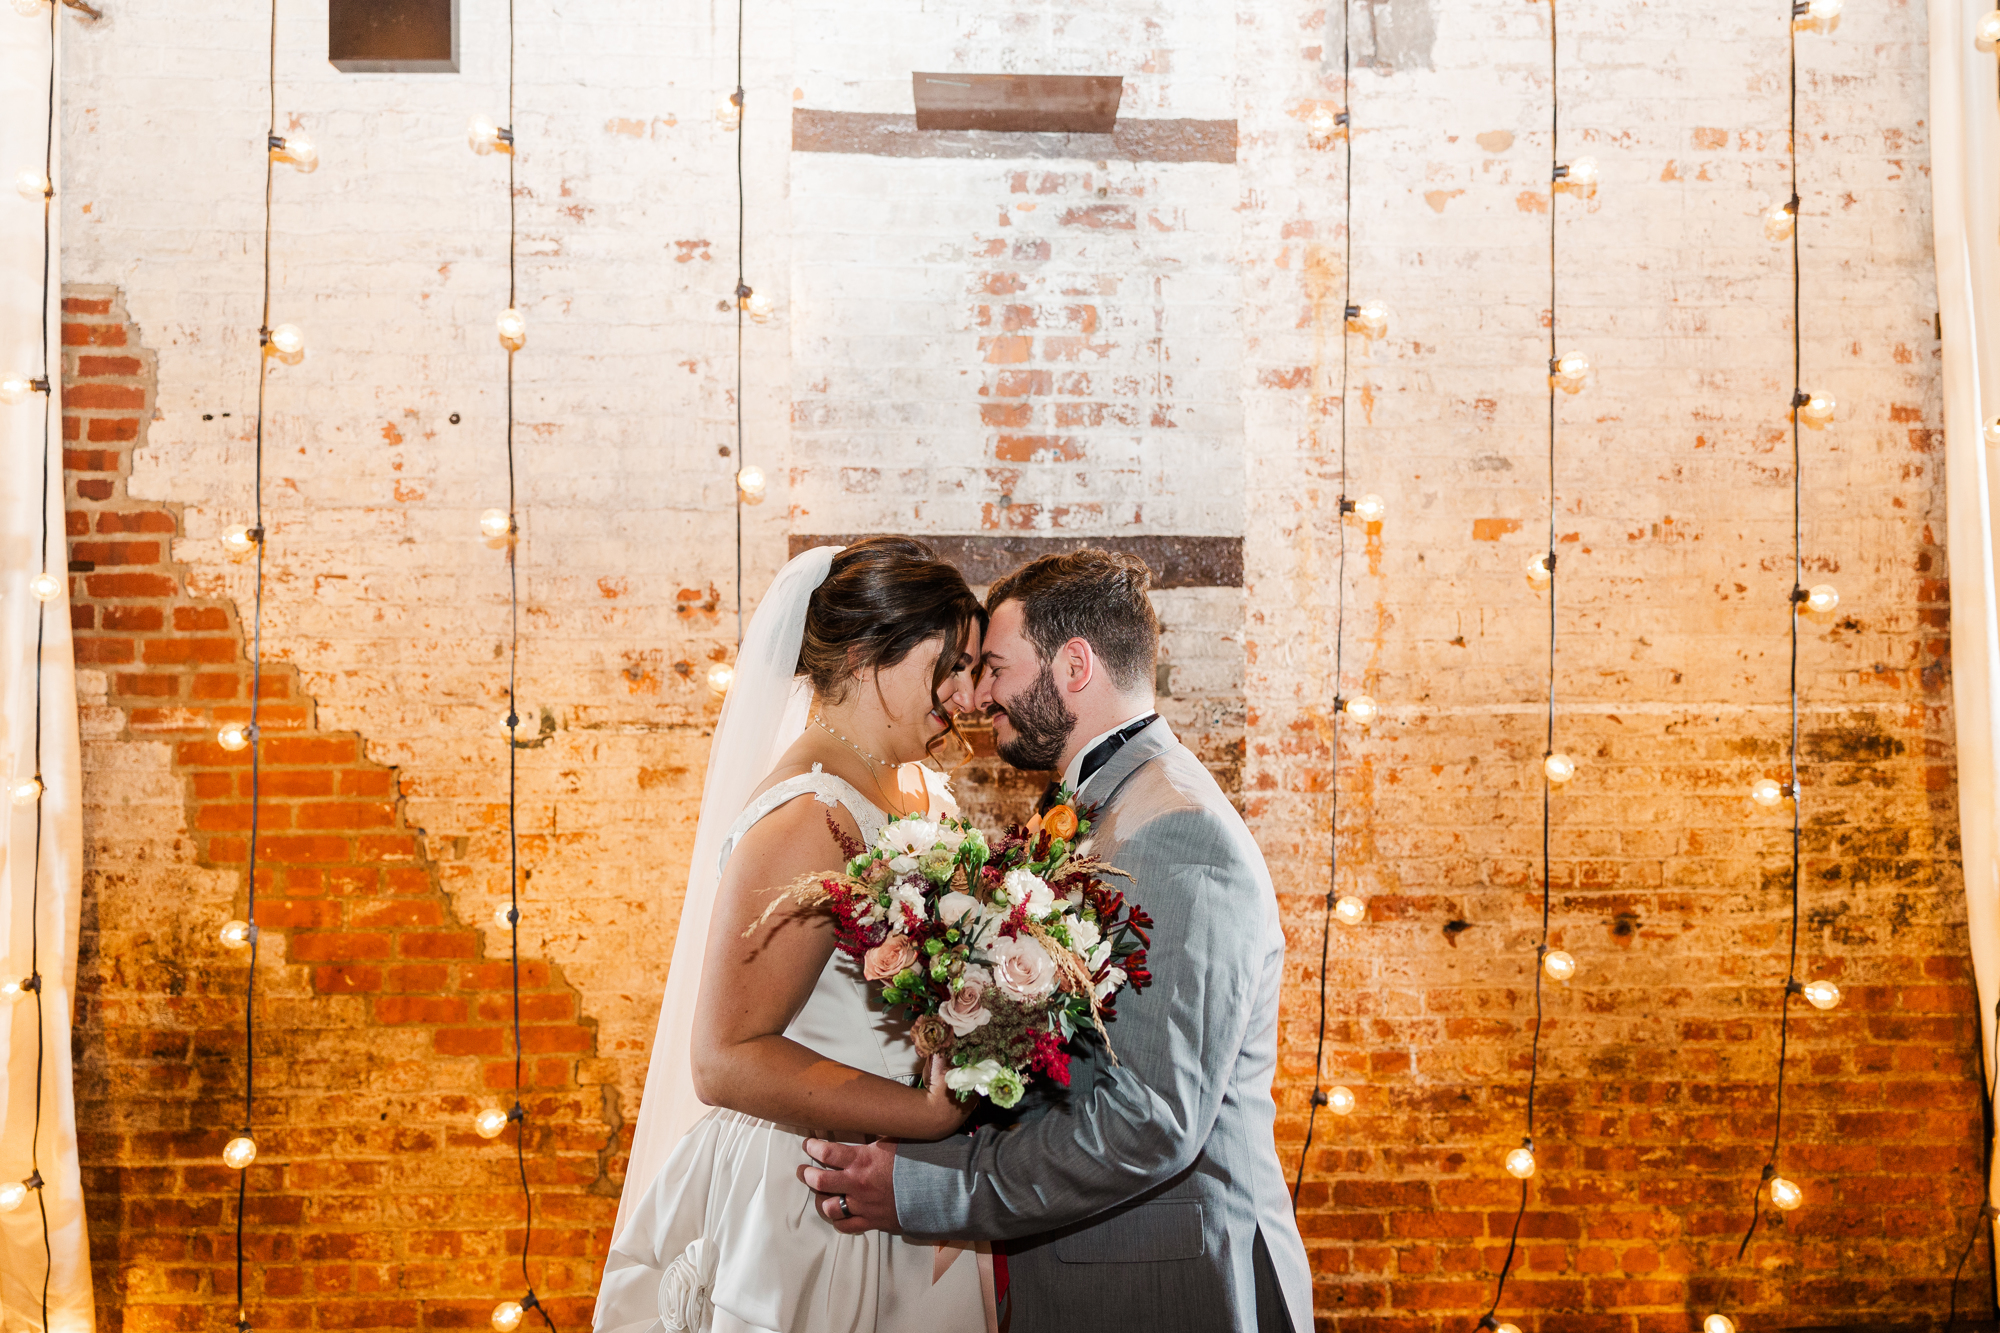 Dazzling Rainy New York Wedding Photos at The Green Building in Autumn